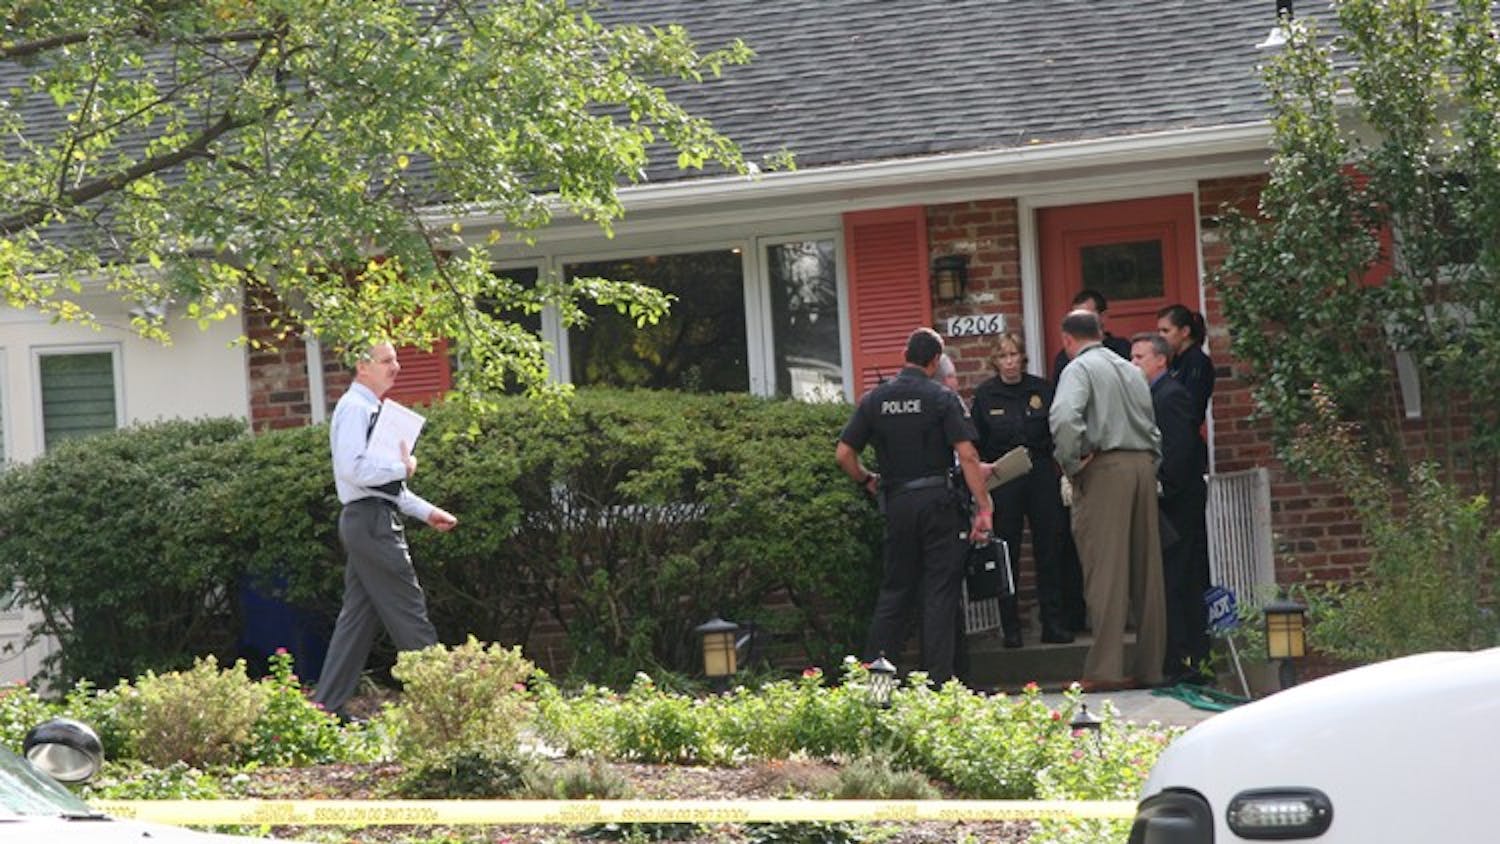 Police investigate the death of Kogod professor Sue Marcum in front of her house in Bethesda, Md.